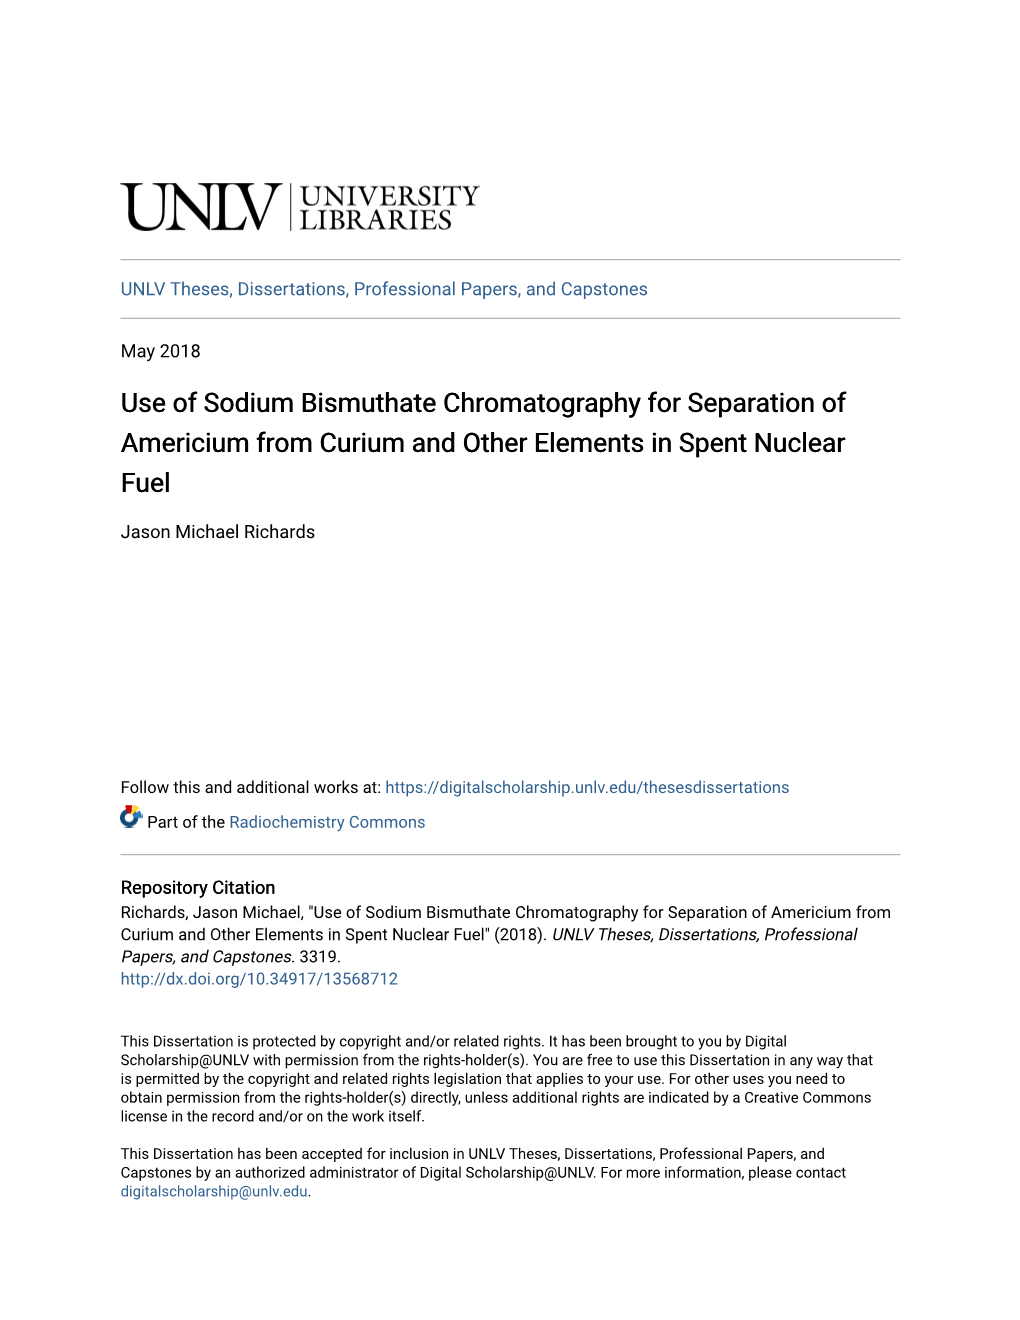 Use of Sodium Bismuthate Chromatography for Separation of Americium from Curium and Other Elements in Spent Nuclear Fuel